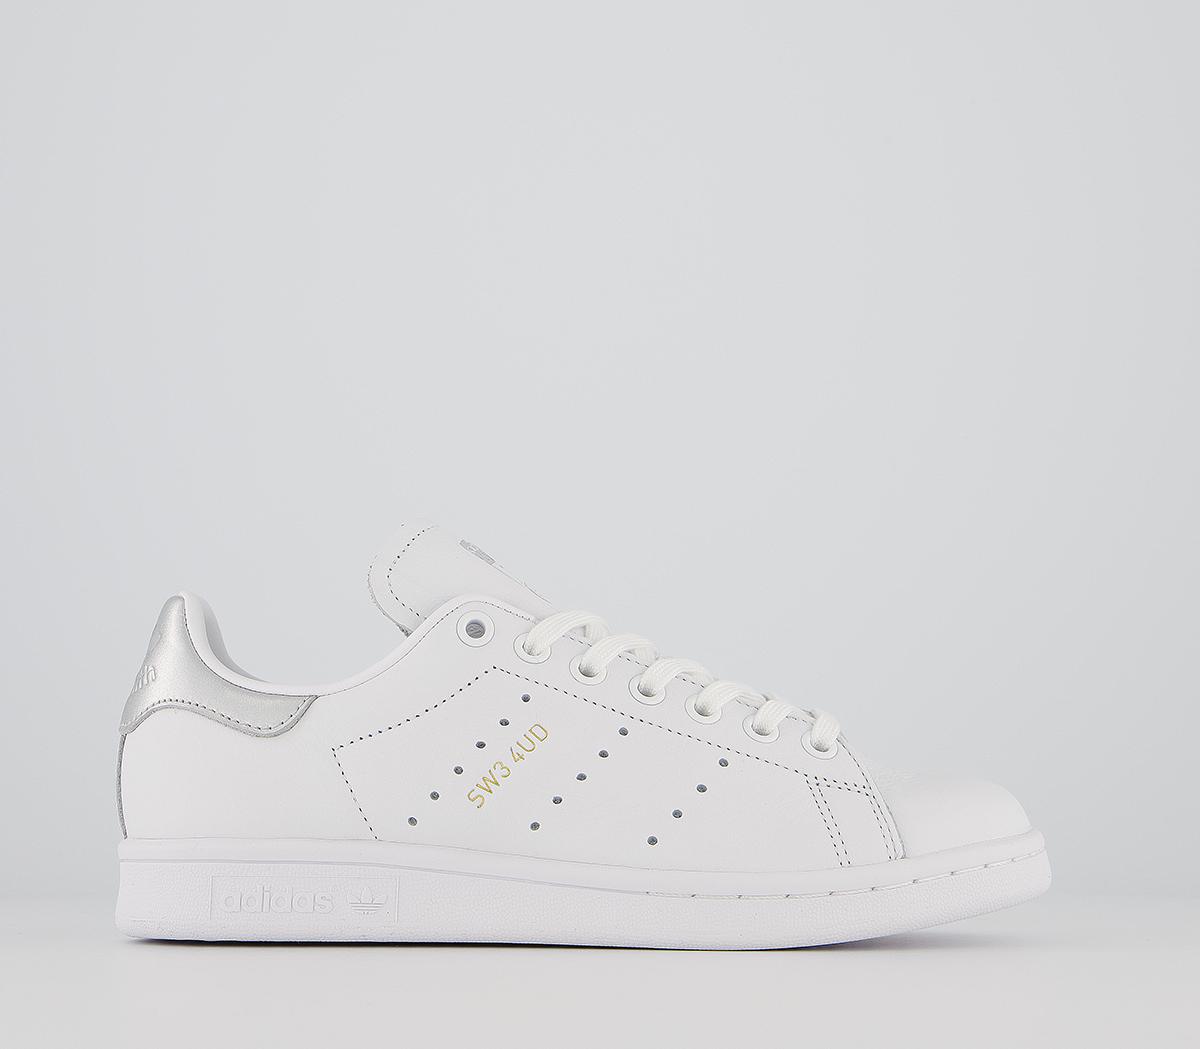 adidasStan Smith TrainersWhite Silver Metallic Sw3 4ud Exclusive